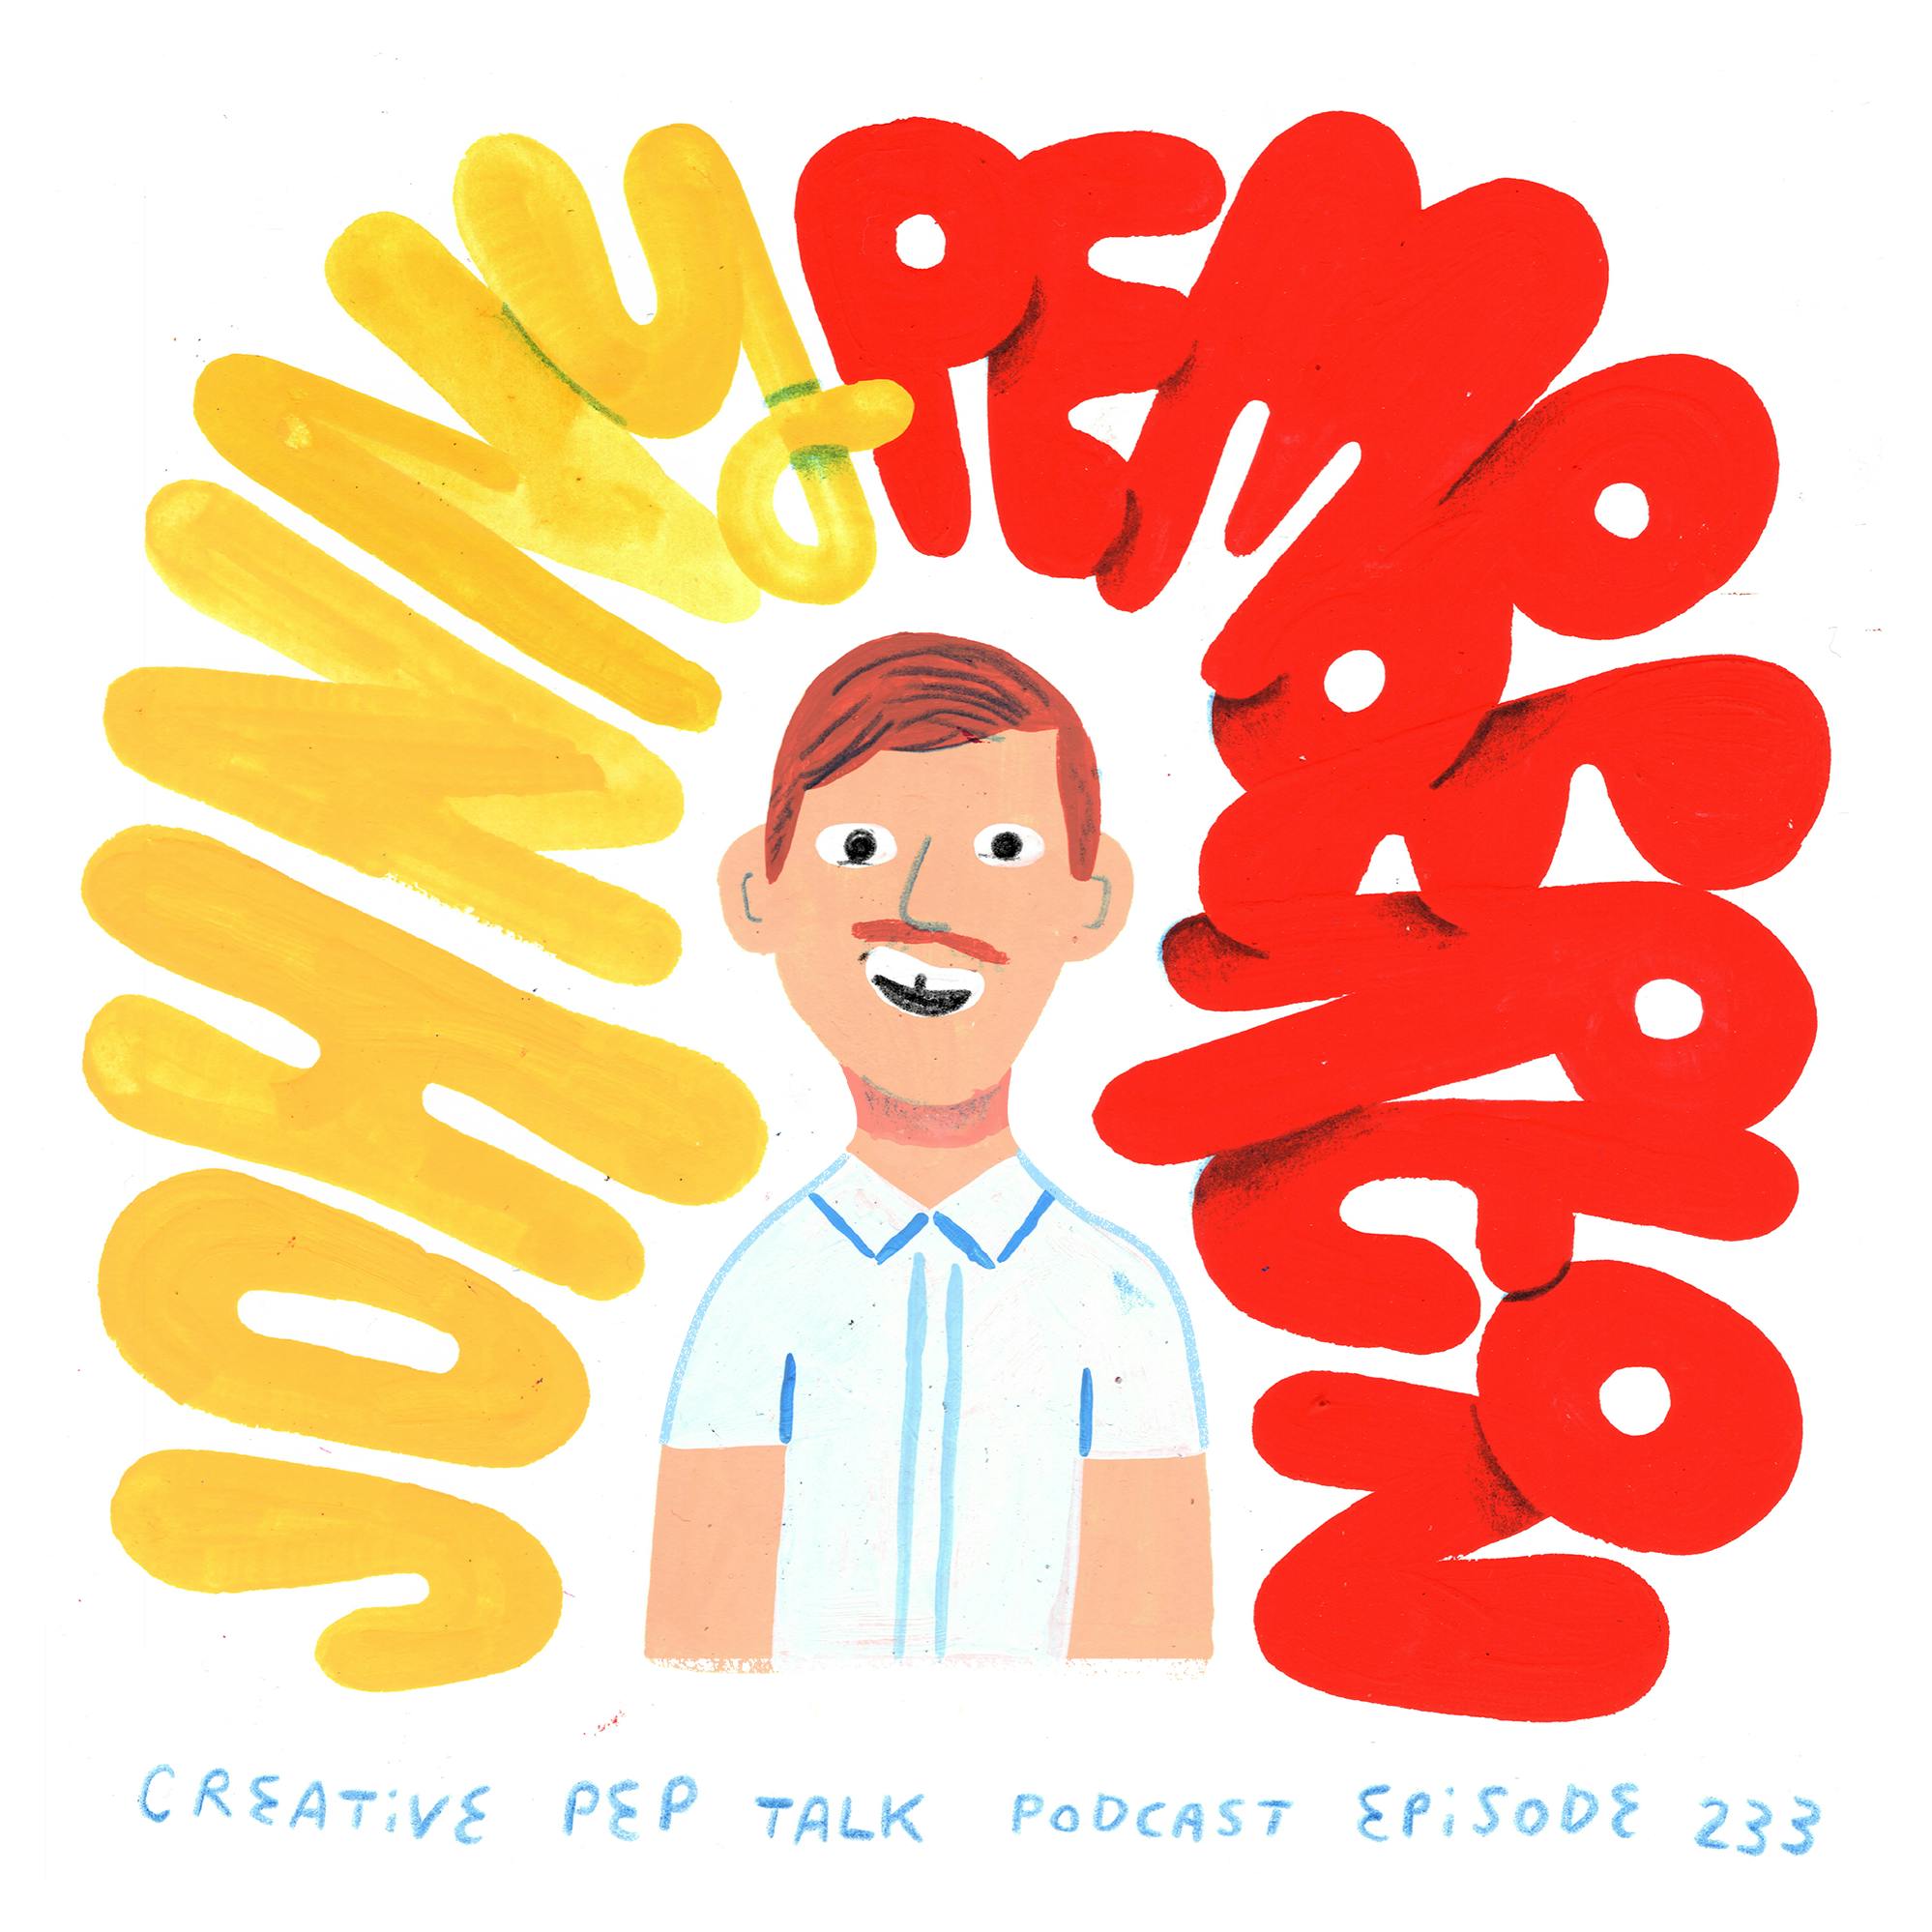 233 - From Doing Stand Up in a Living Room to a Role on an NBC TV Show - Comedian Johnny Pemberton